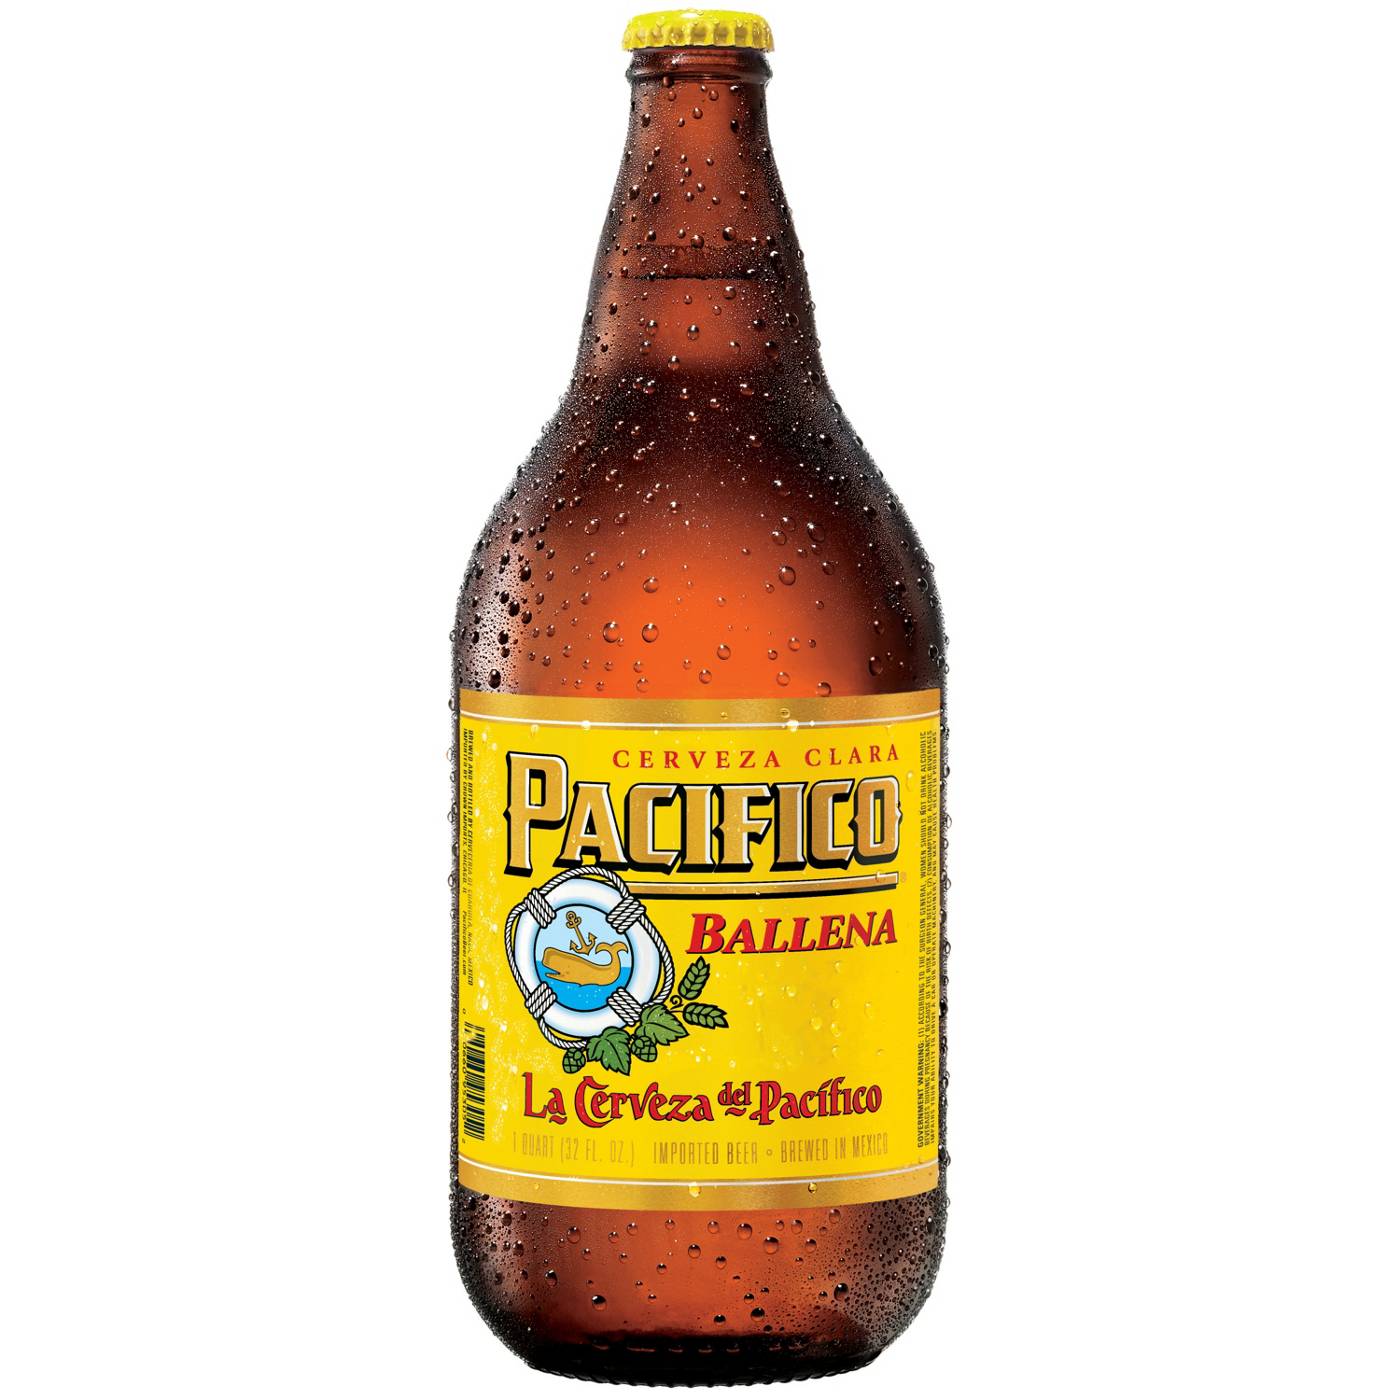 Pacifico Clara Ballena Mexican Lager Import Beer 32 oz Bottle; image 1 of 8